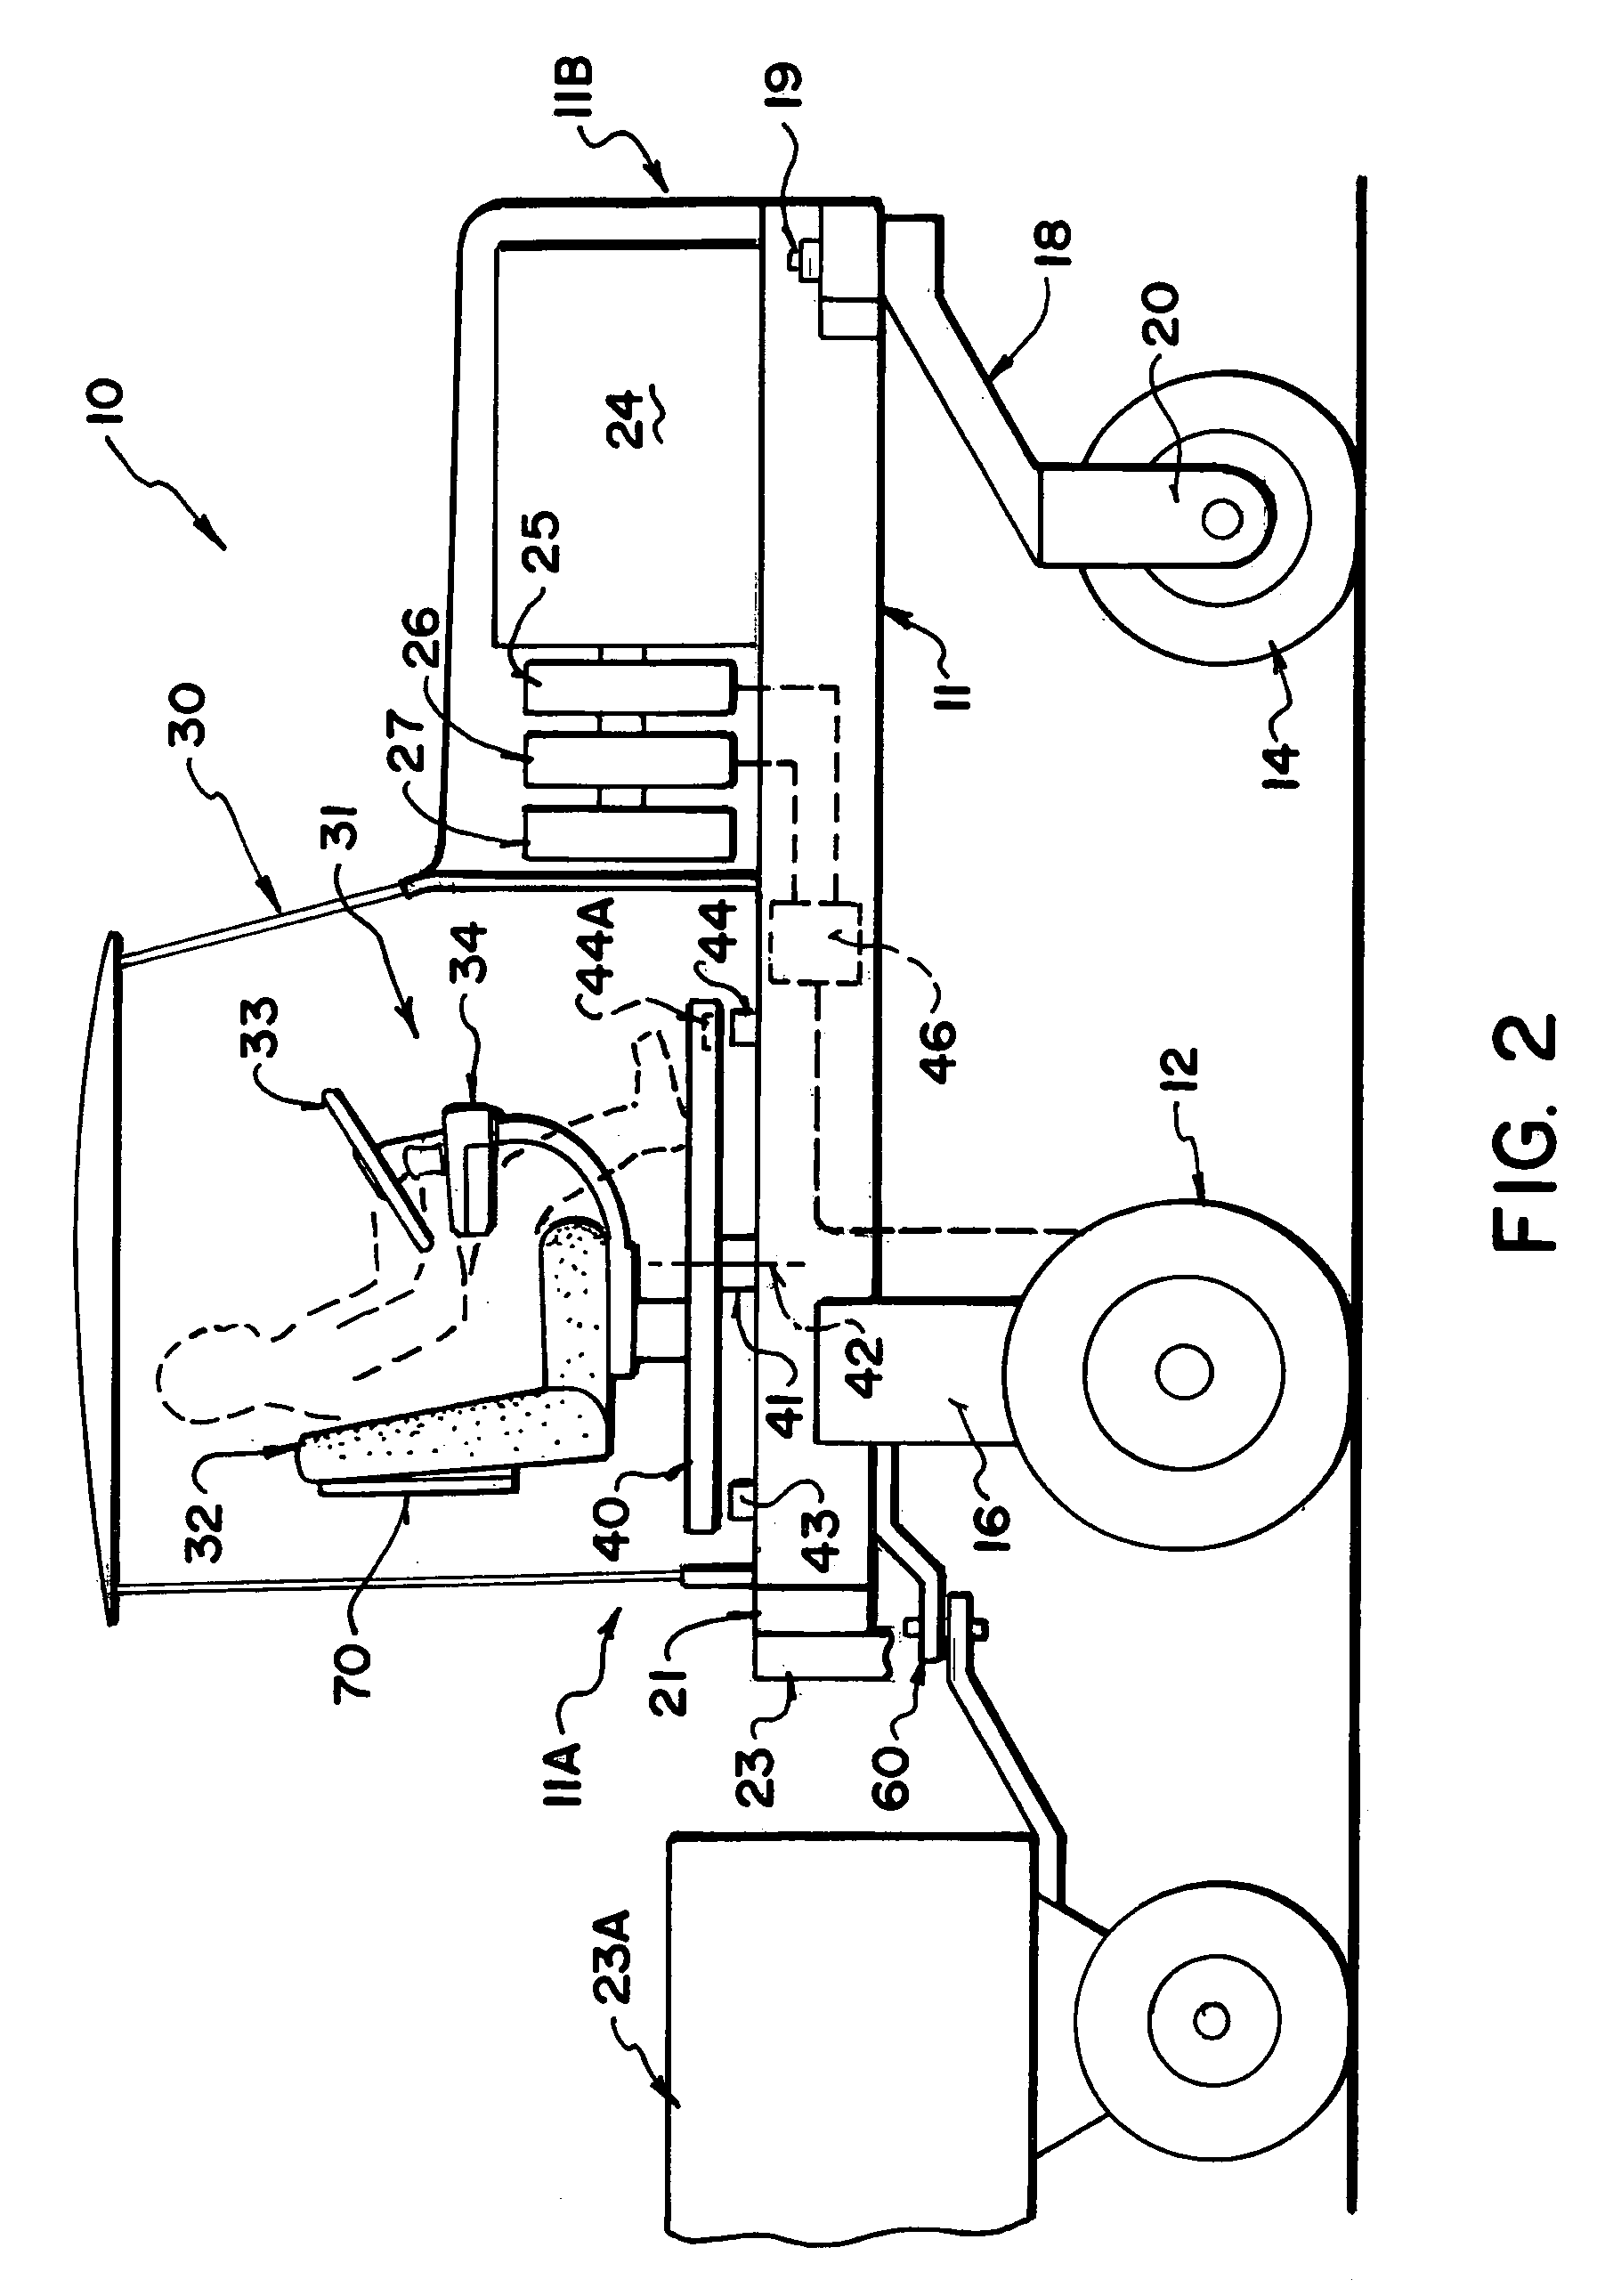 Tractor with reversible operator position for operation and transport